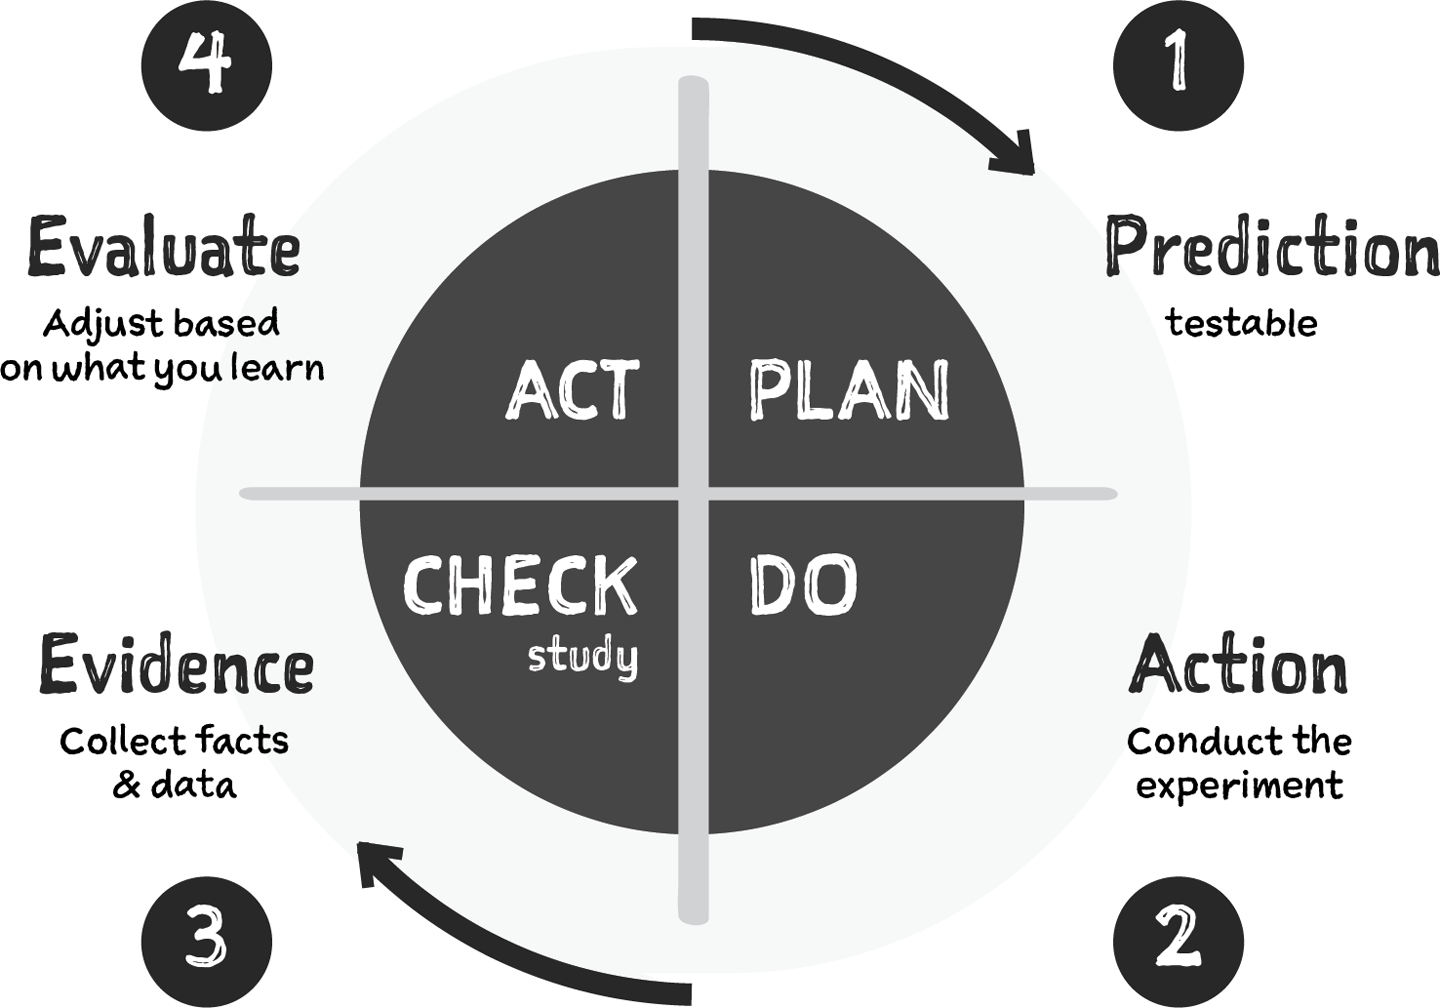 Interpretation of the PDCA loop by Mike Rother (Source: Kata slides and graphics)